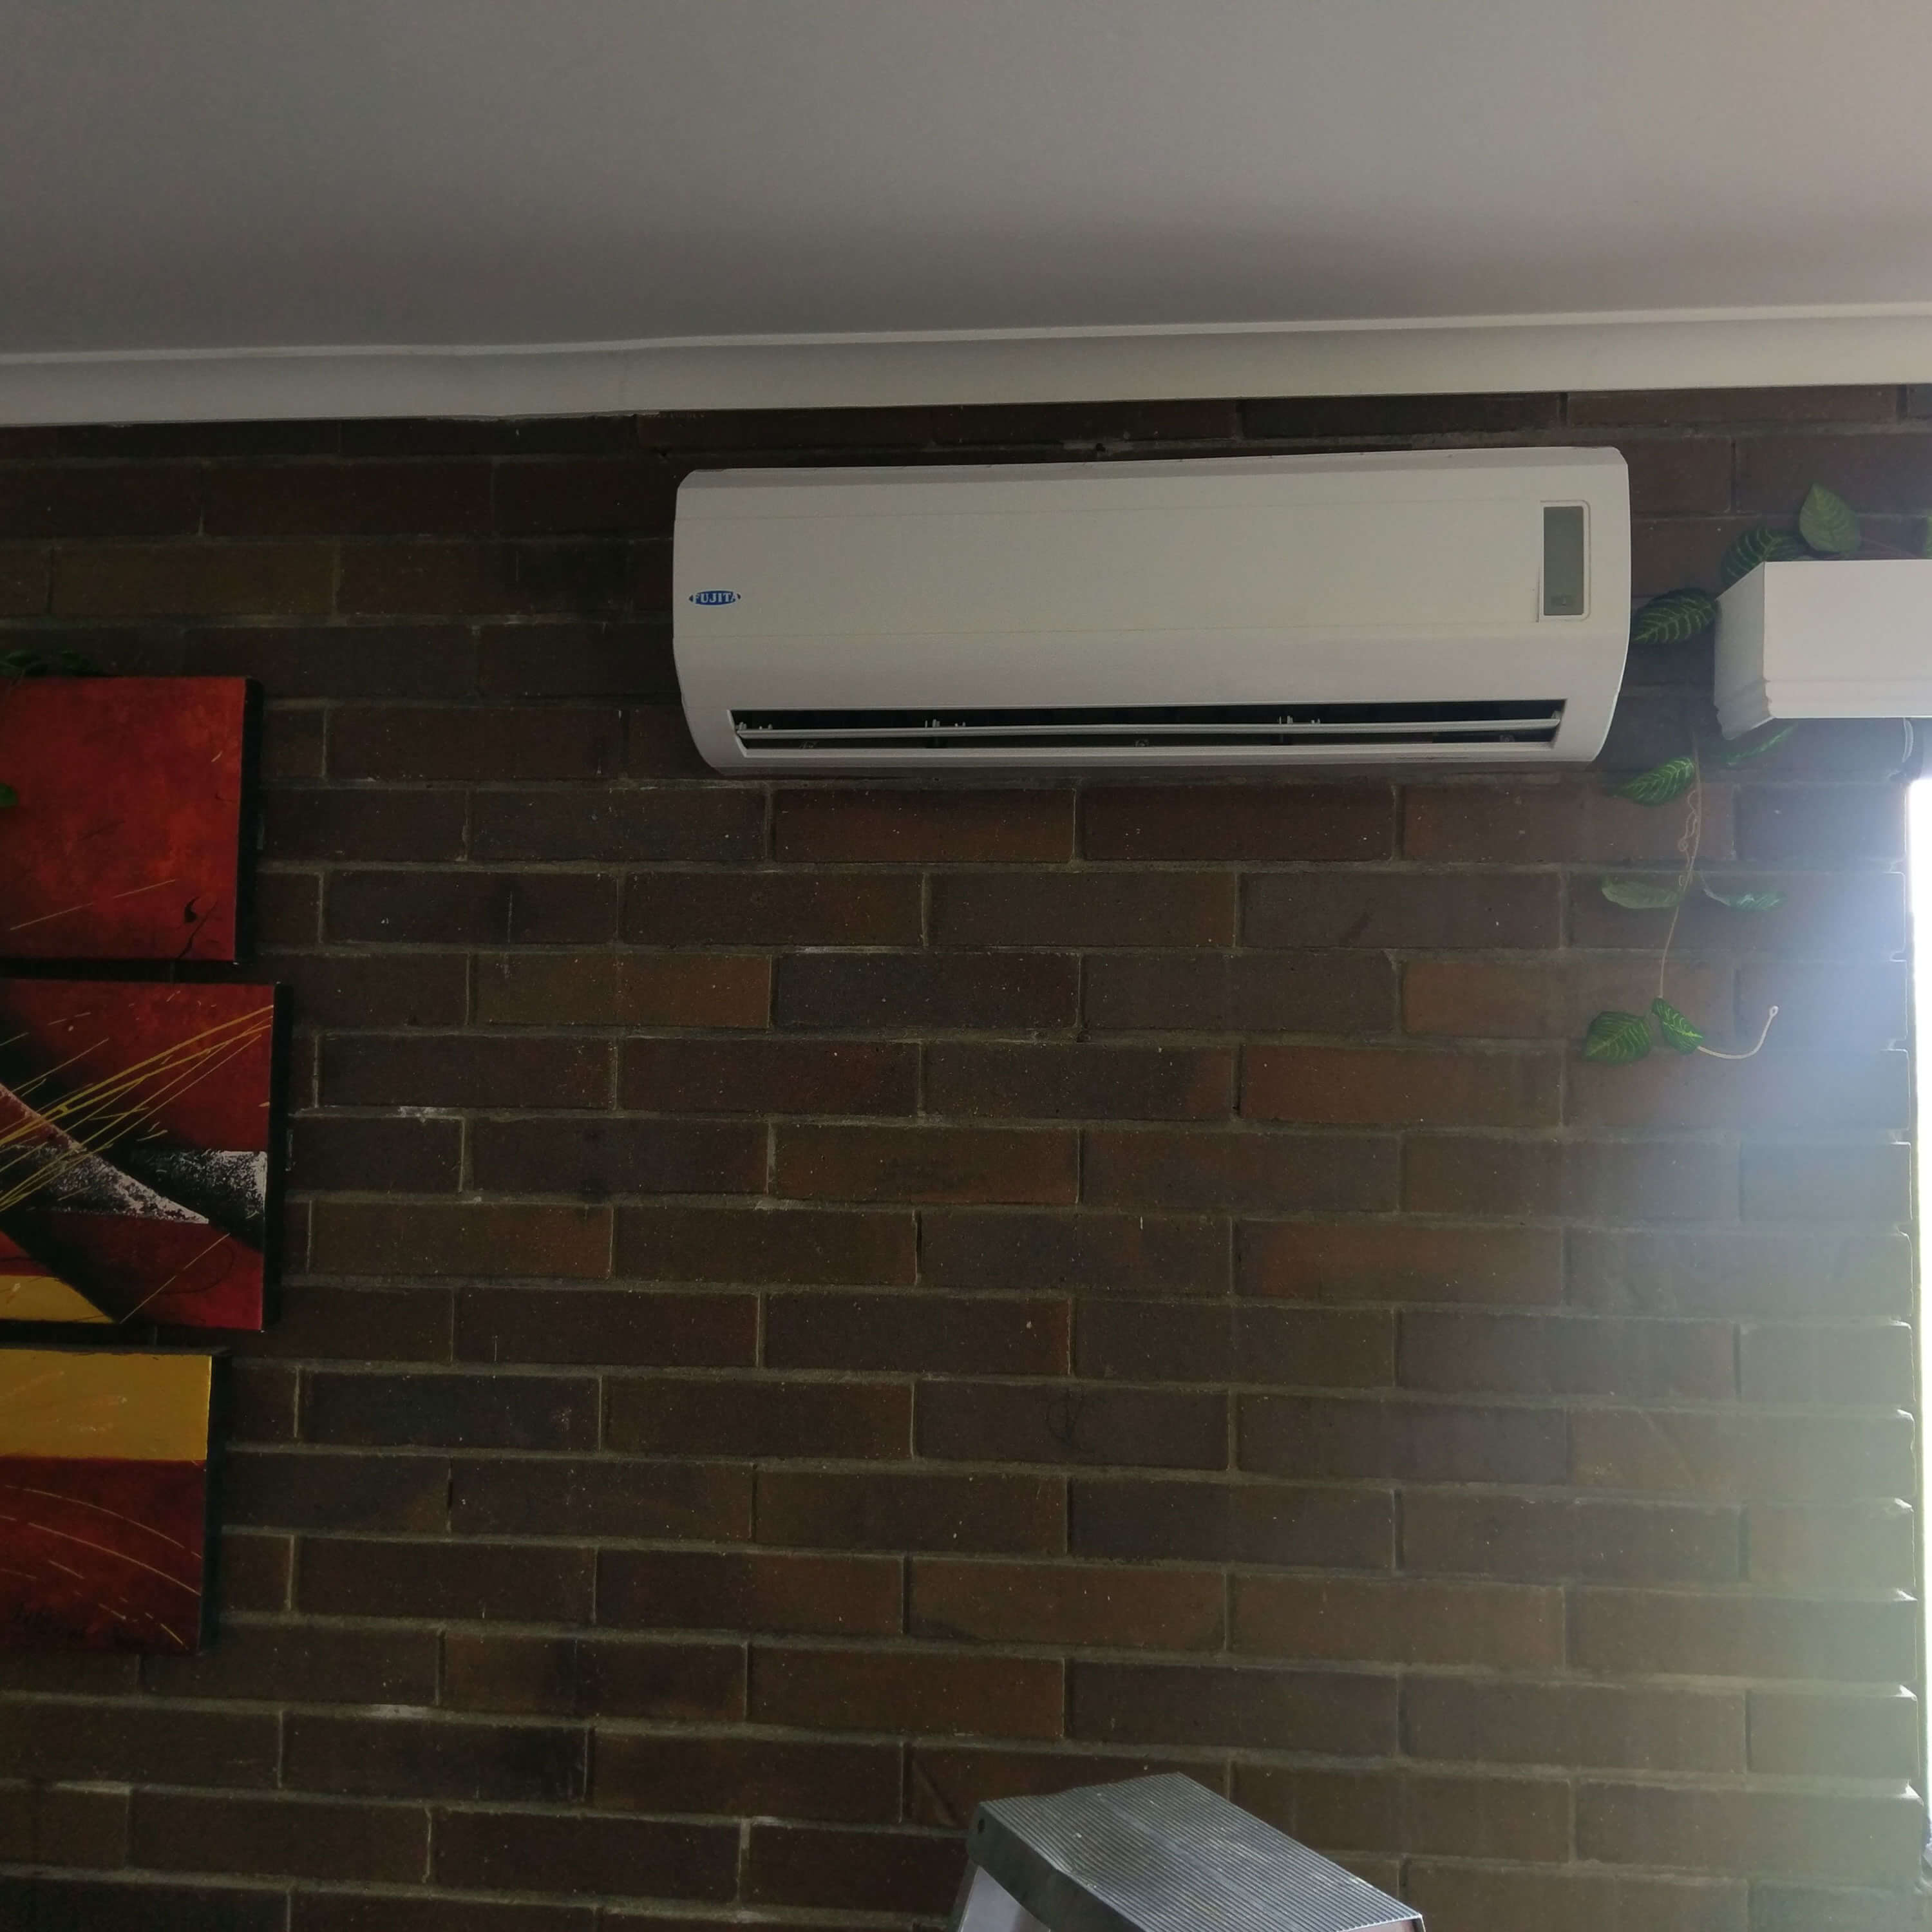 All districts air conditioning hervey Bay sales gallery image 6